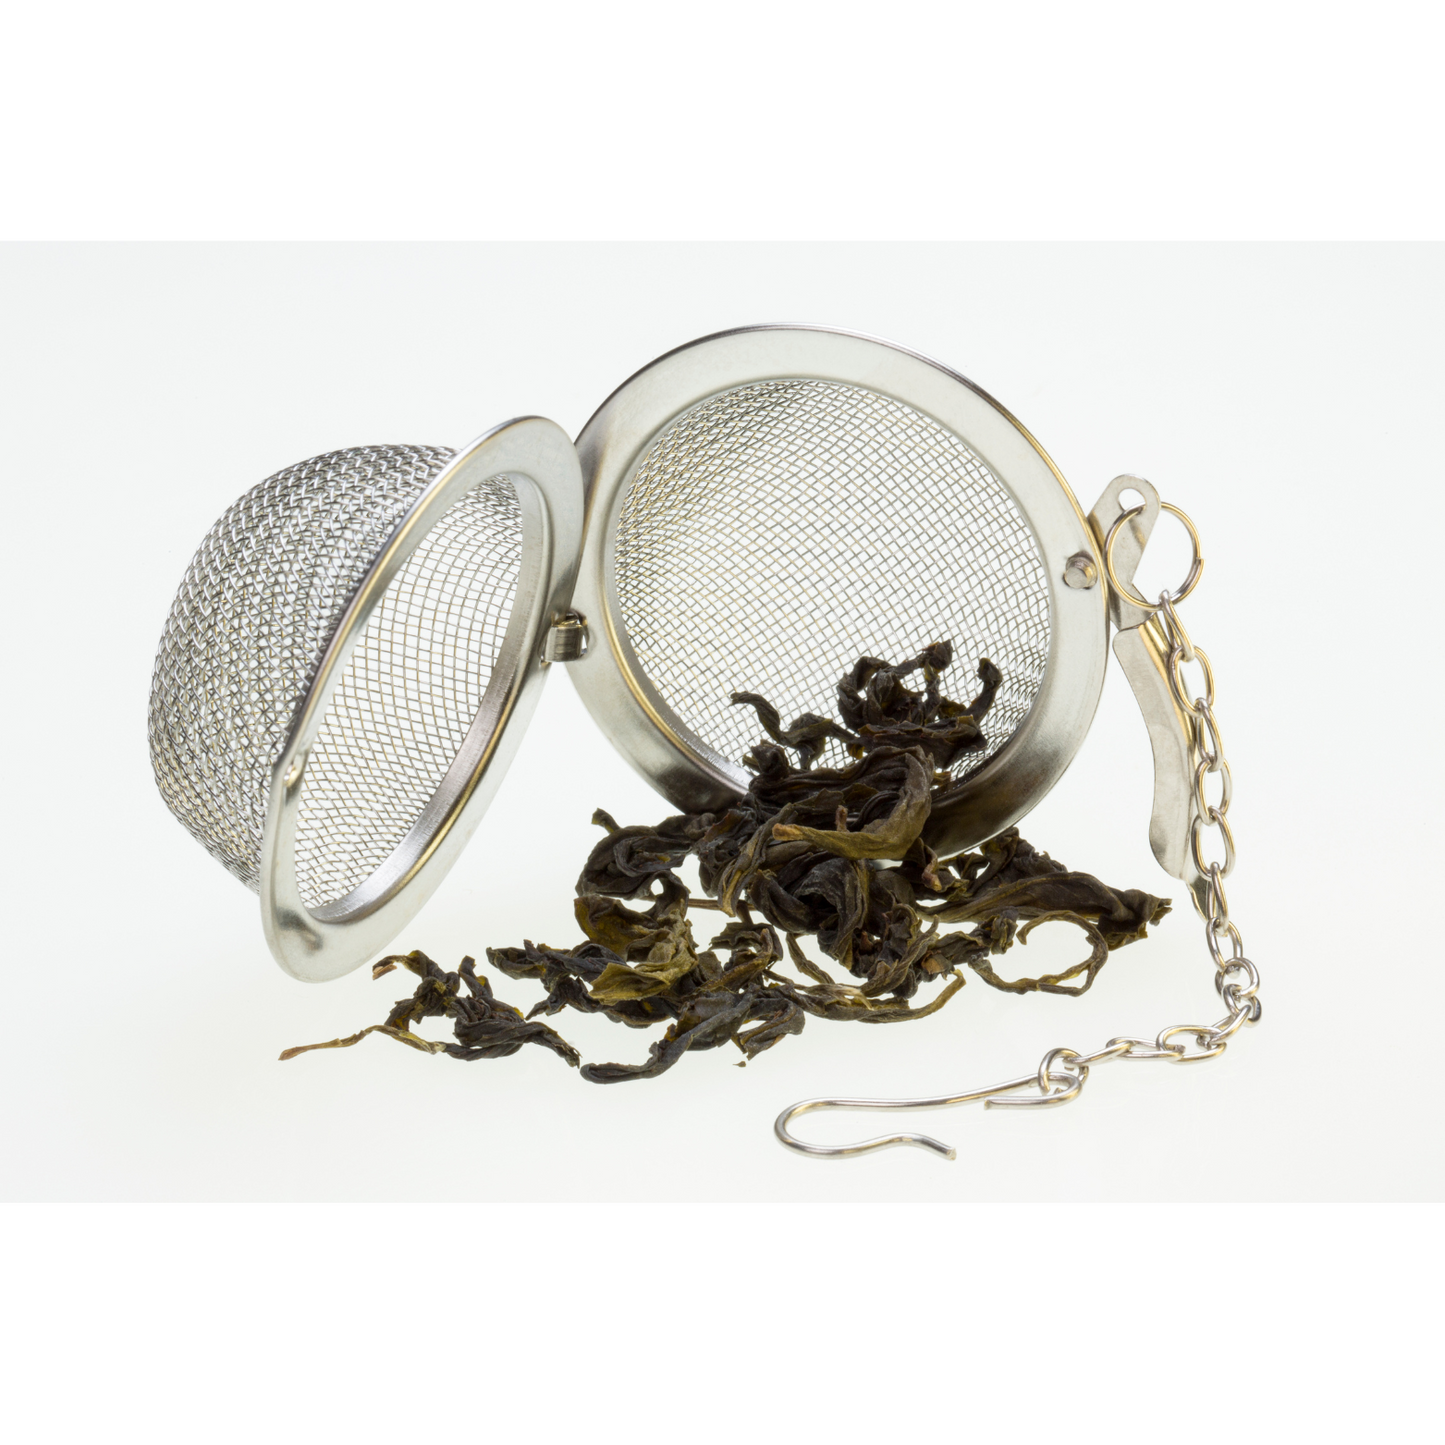 Witchy Pooh's Tea Infuser Mesh Ball 2inch for Brewing Loose Leaf Tea Good for Herbal Teas